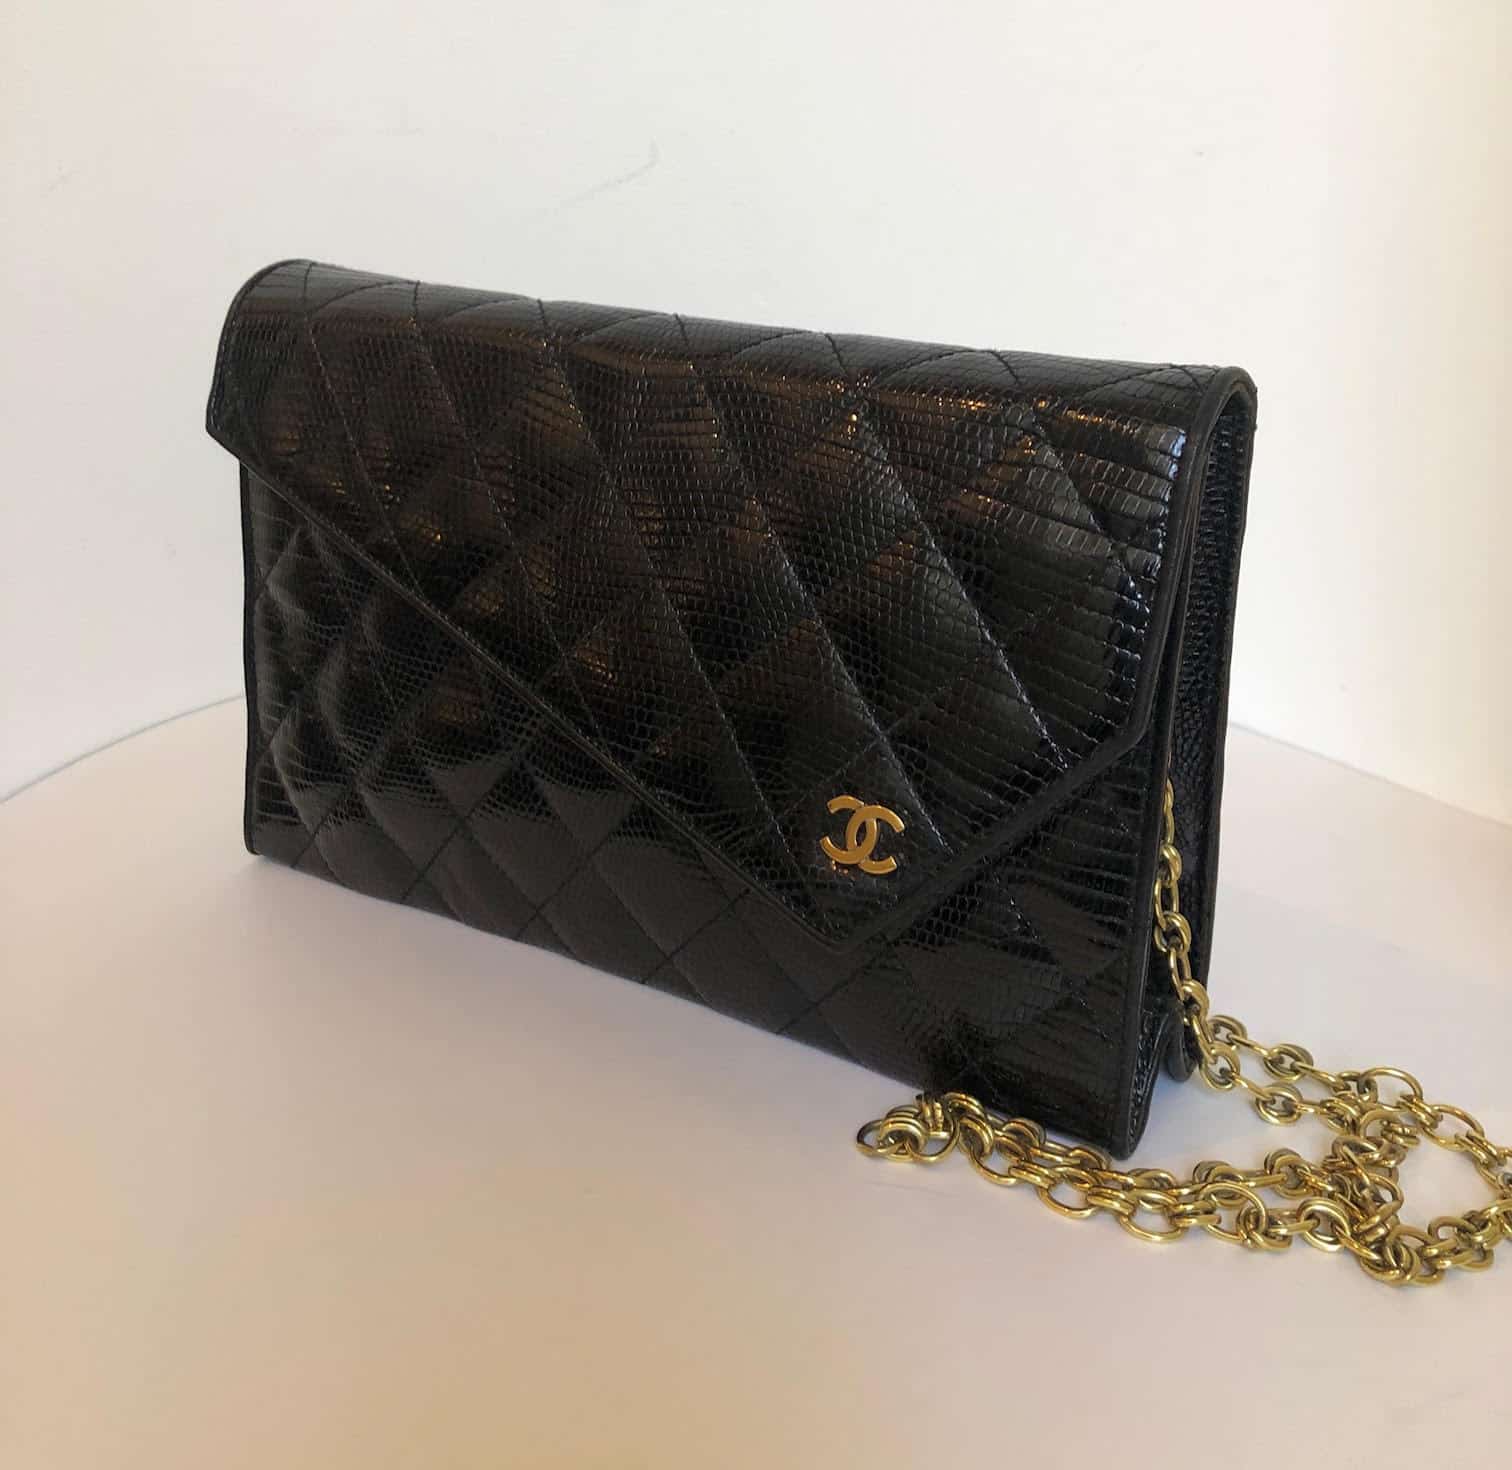 Chanel Black Lizard Leather Gold Chain 2 in 1 Clutch Flap Evening